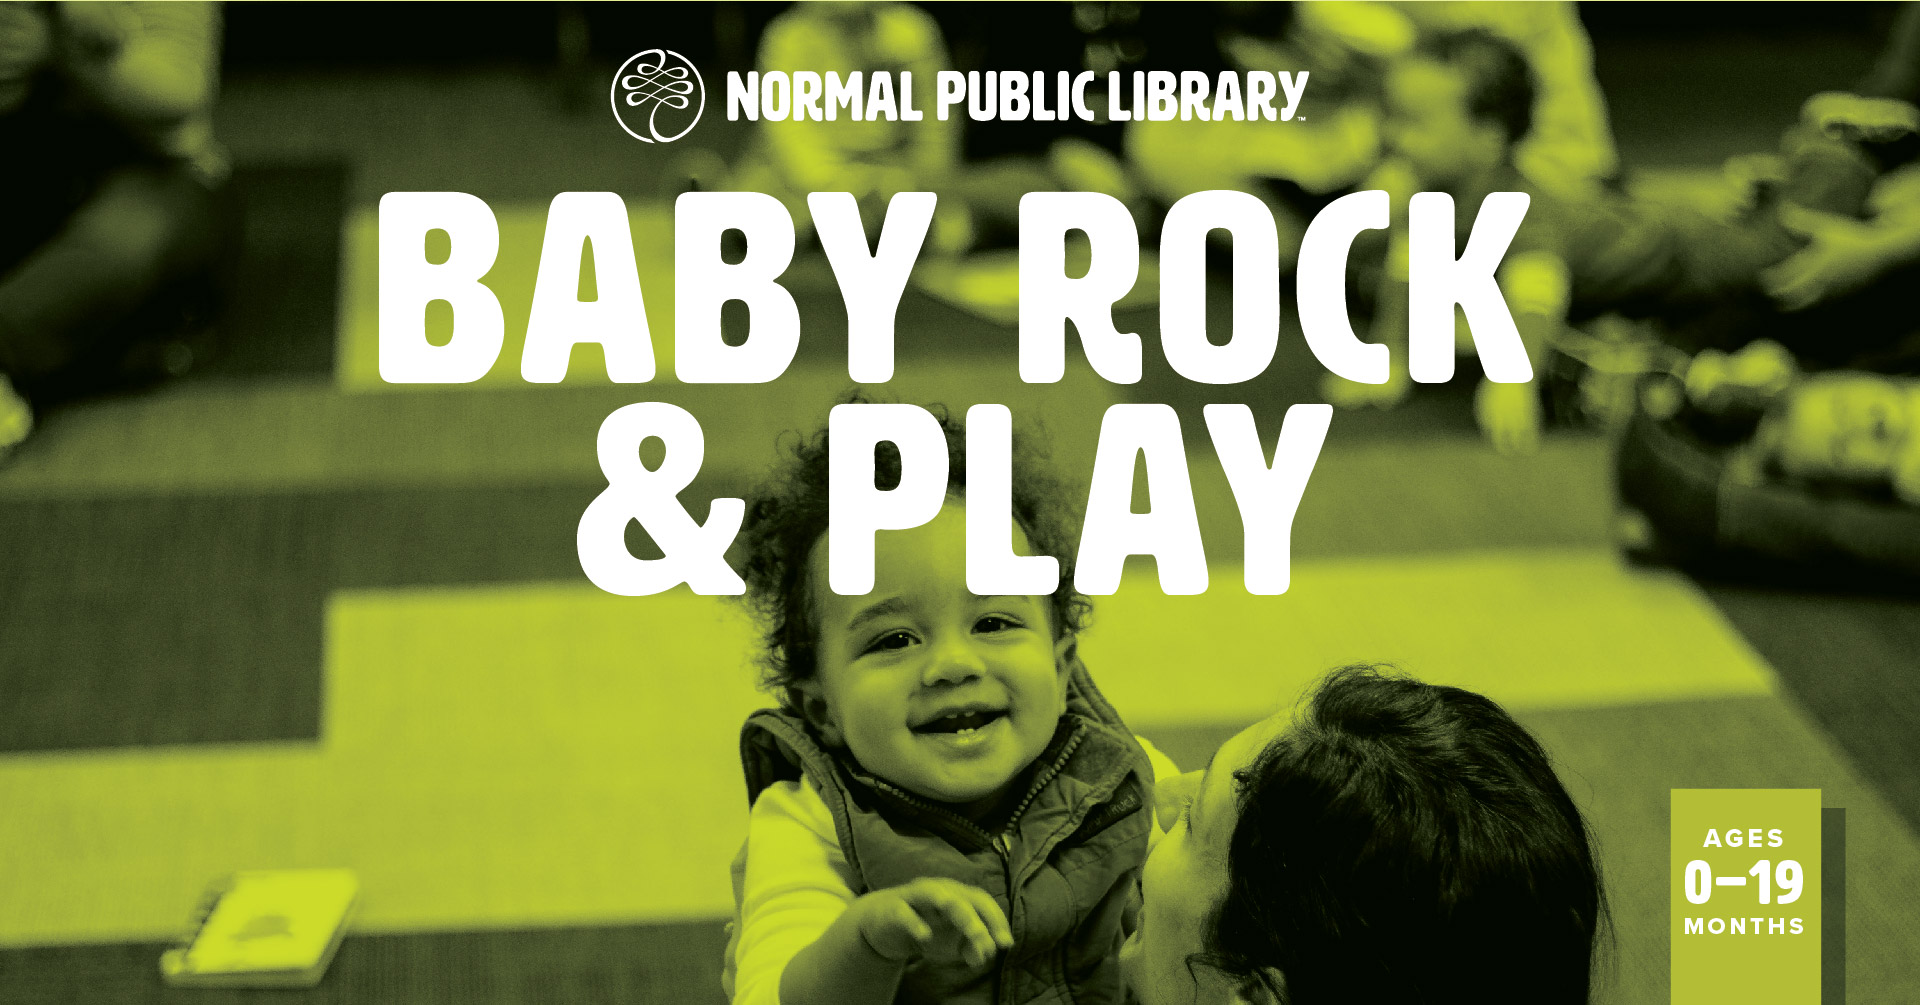 Image for Baby Rock & Play.